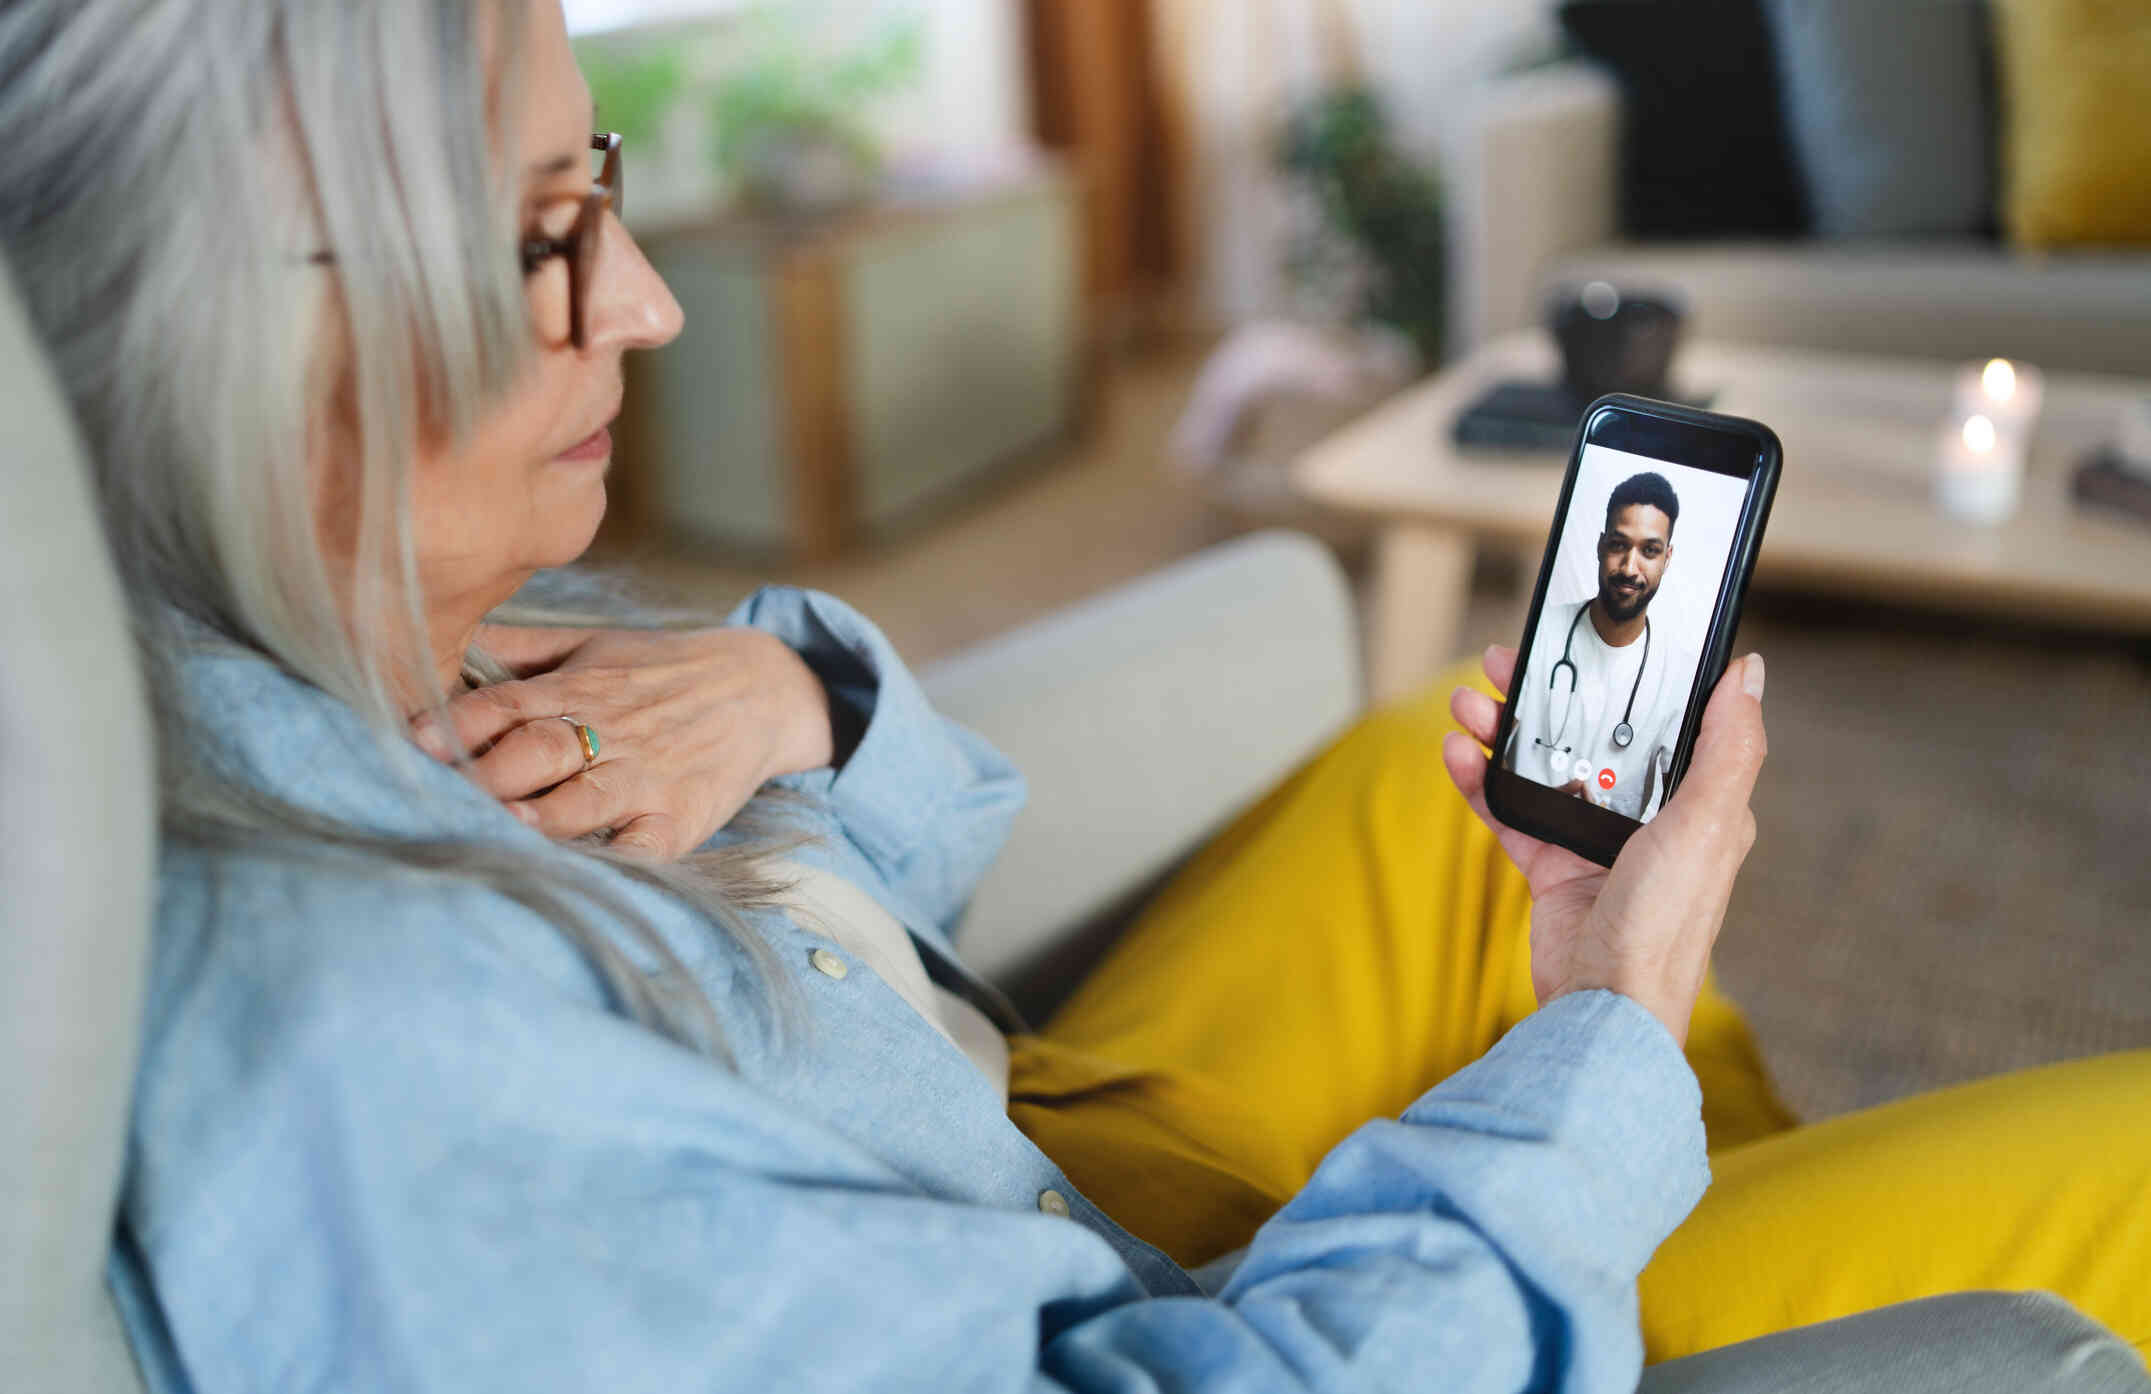 A middle aged woman looks down at the cellphone on her hand while talking to a male doctor during a telehealth video call.